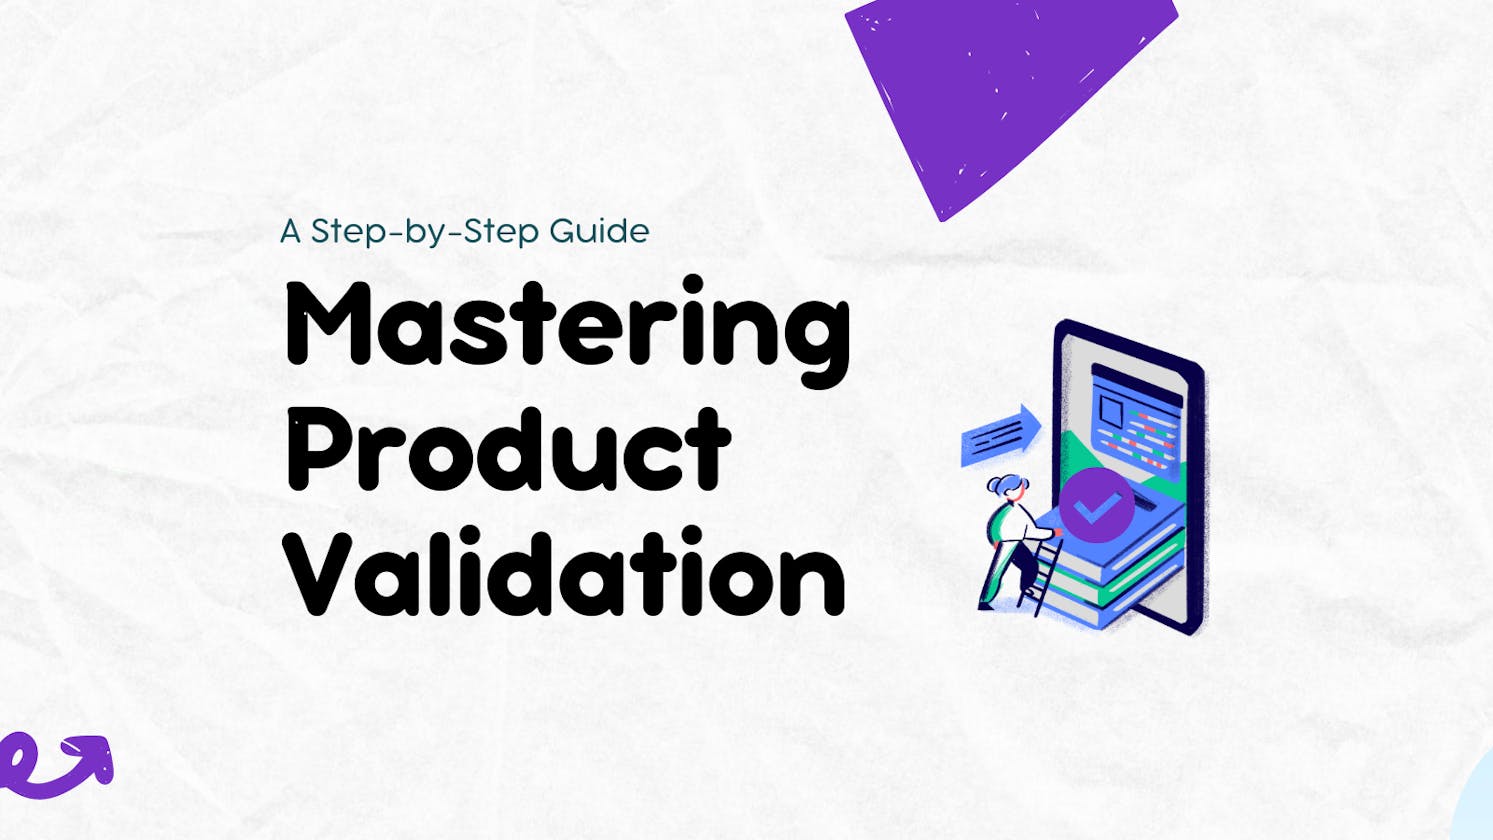 Mastering Product Validation: A Step-by-Step Guide